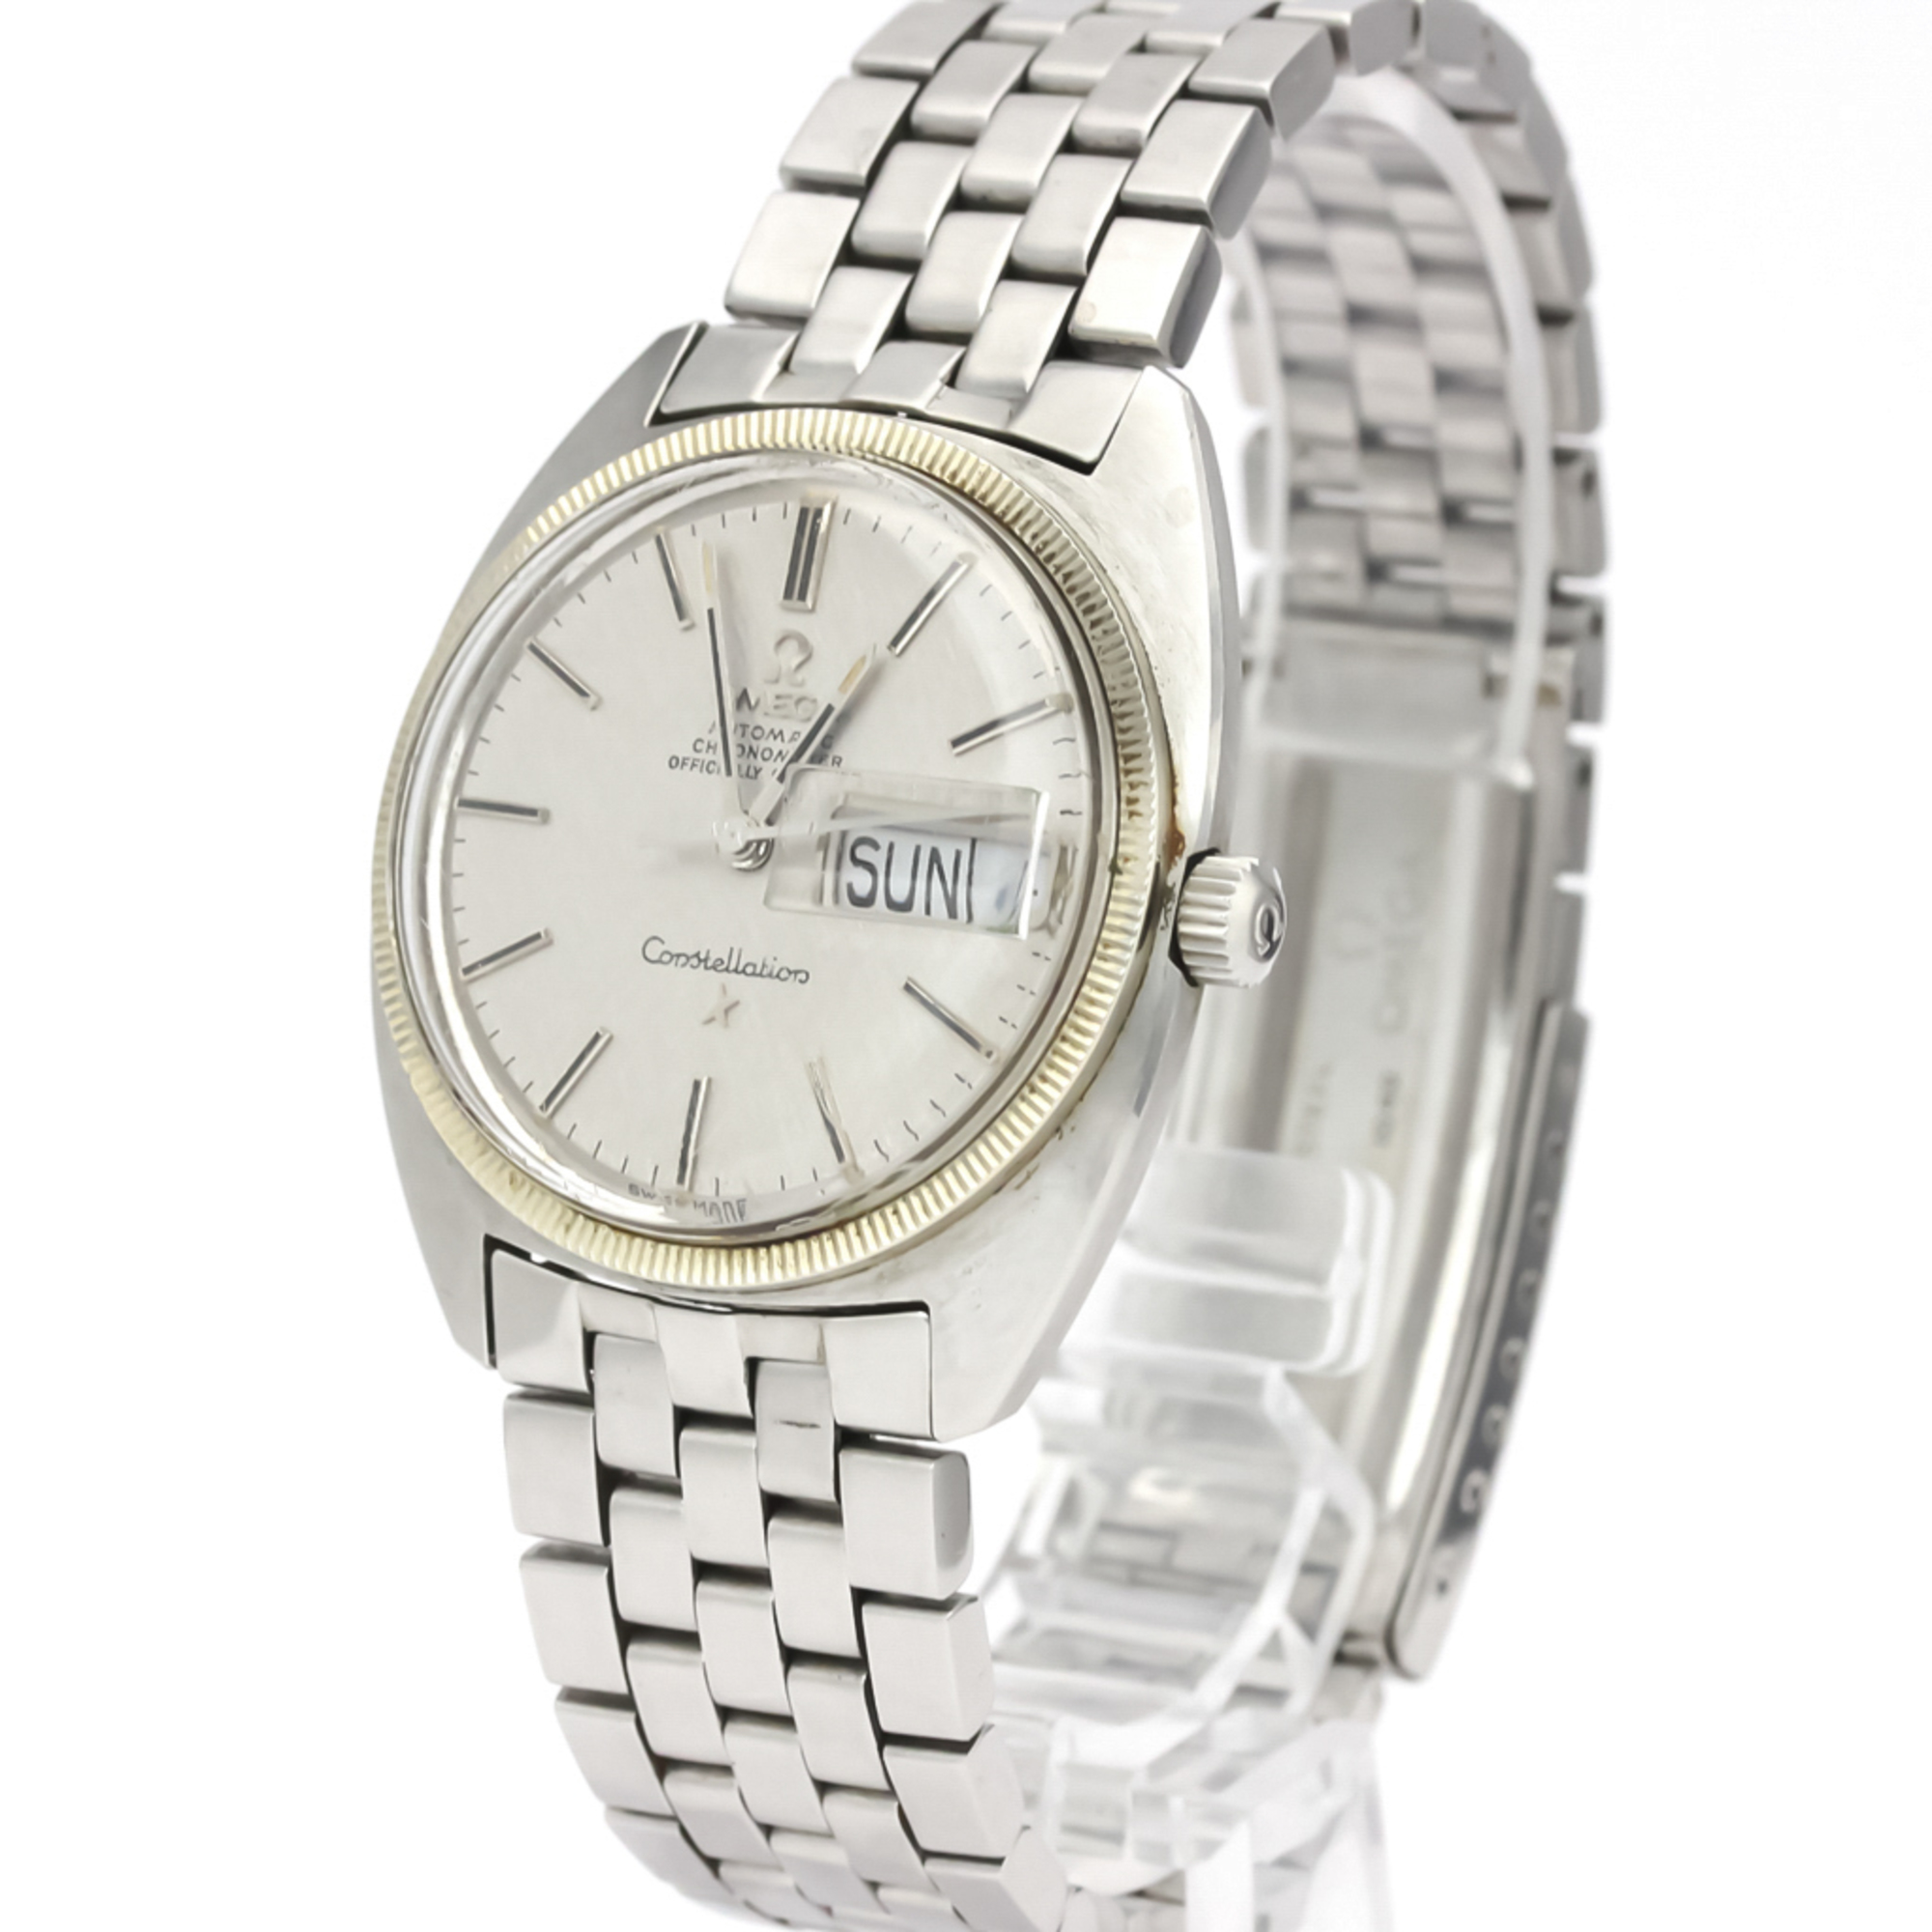 Omega Constellation Automatic Stainless Steel Men's Dress Watch 168.029